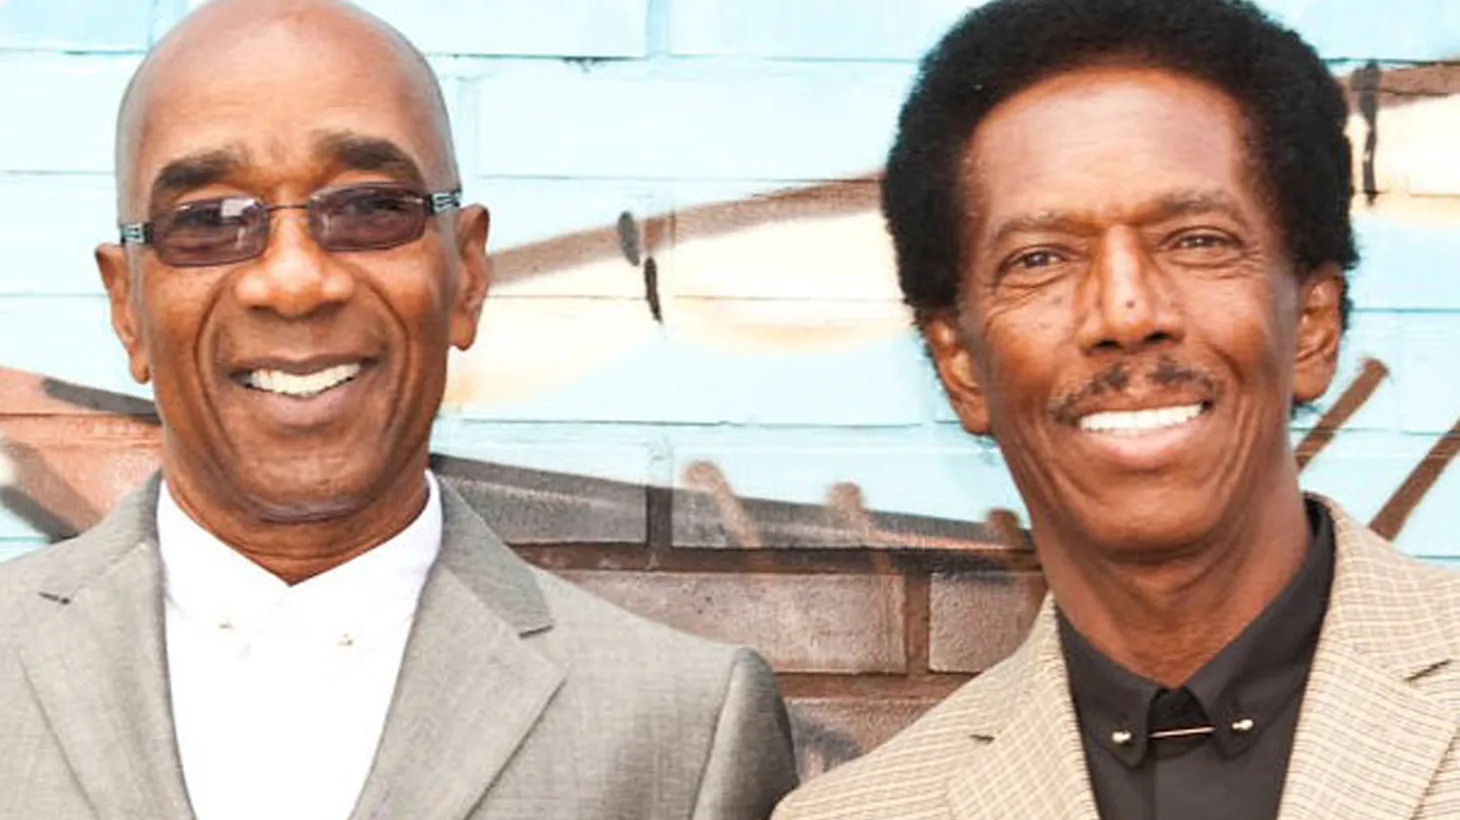 Jamaican duo Keith & Tex have been making music for more than 50 years and are one of the last groups from the 60s rocksteady era who are still touring.